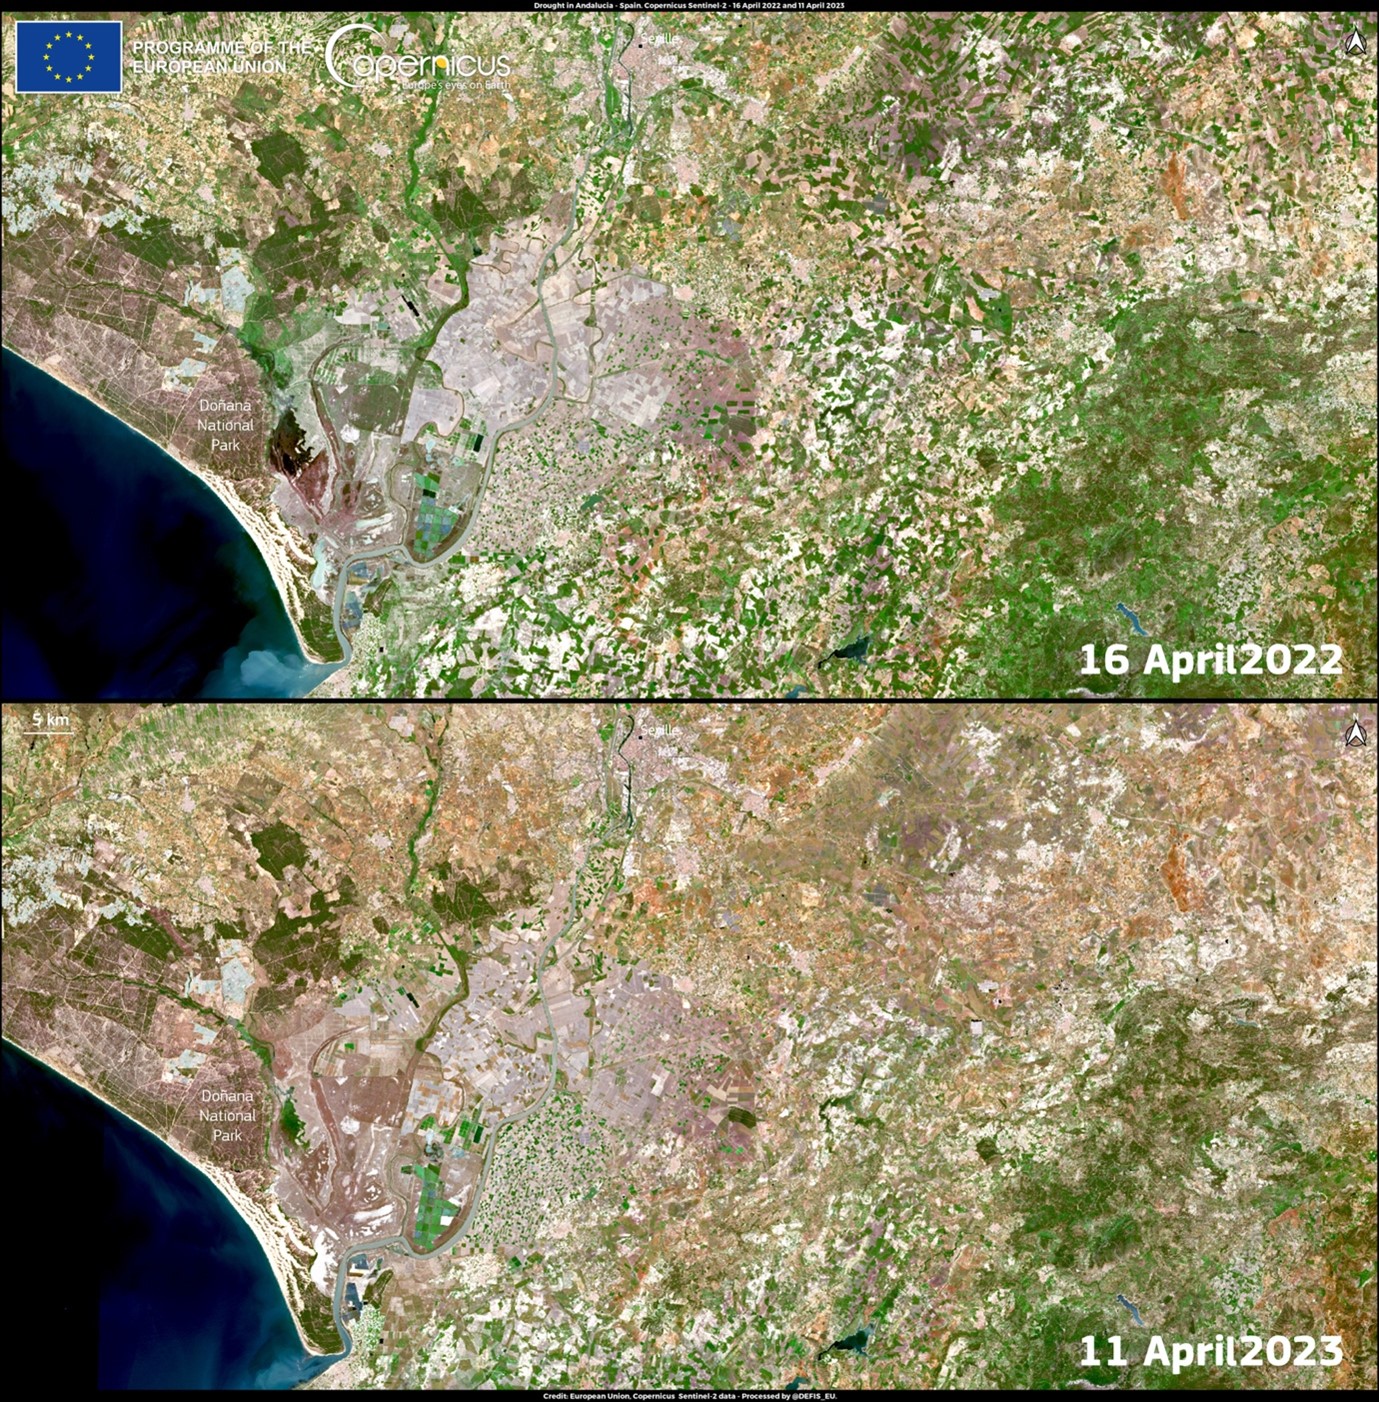 Images taken one year apart illustrate how dry the land has become in southern Spain